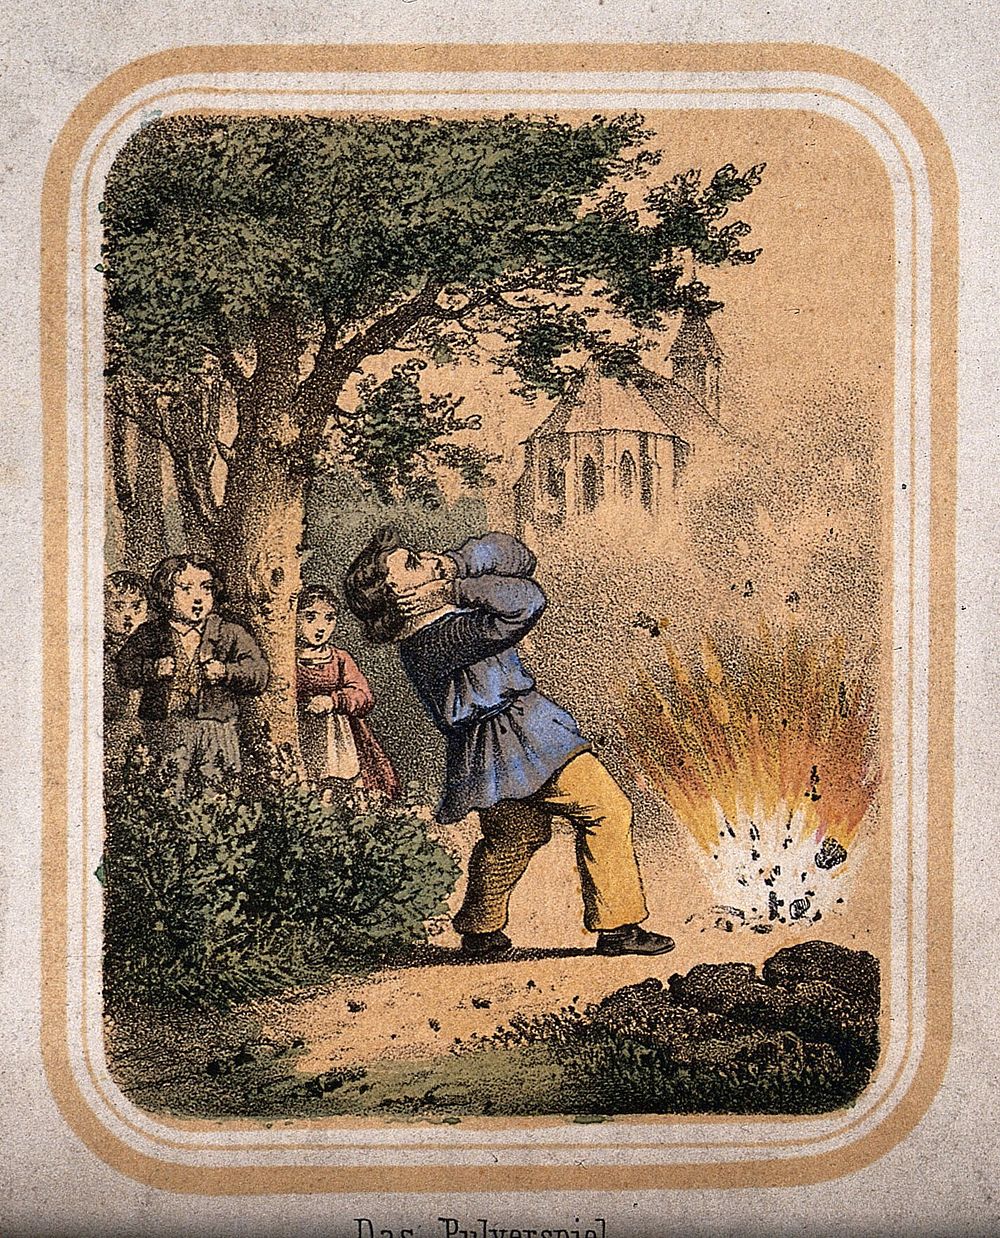 A small boy puts his hands over his ears as a firecracker explodes in front of him. Coloured lithograph.